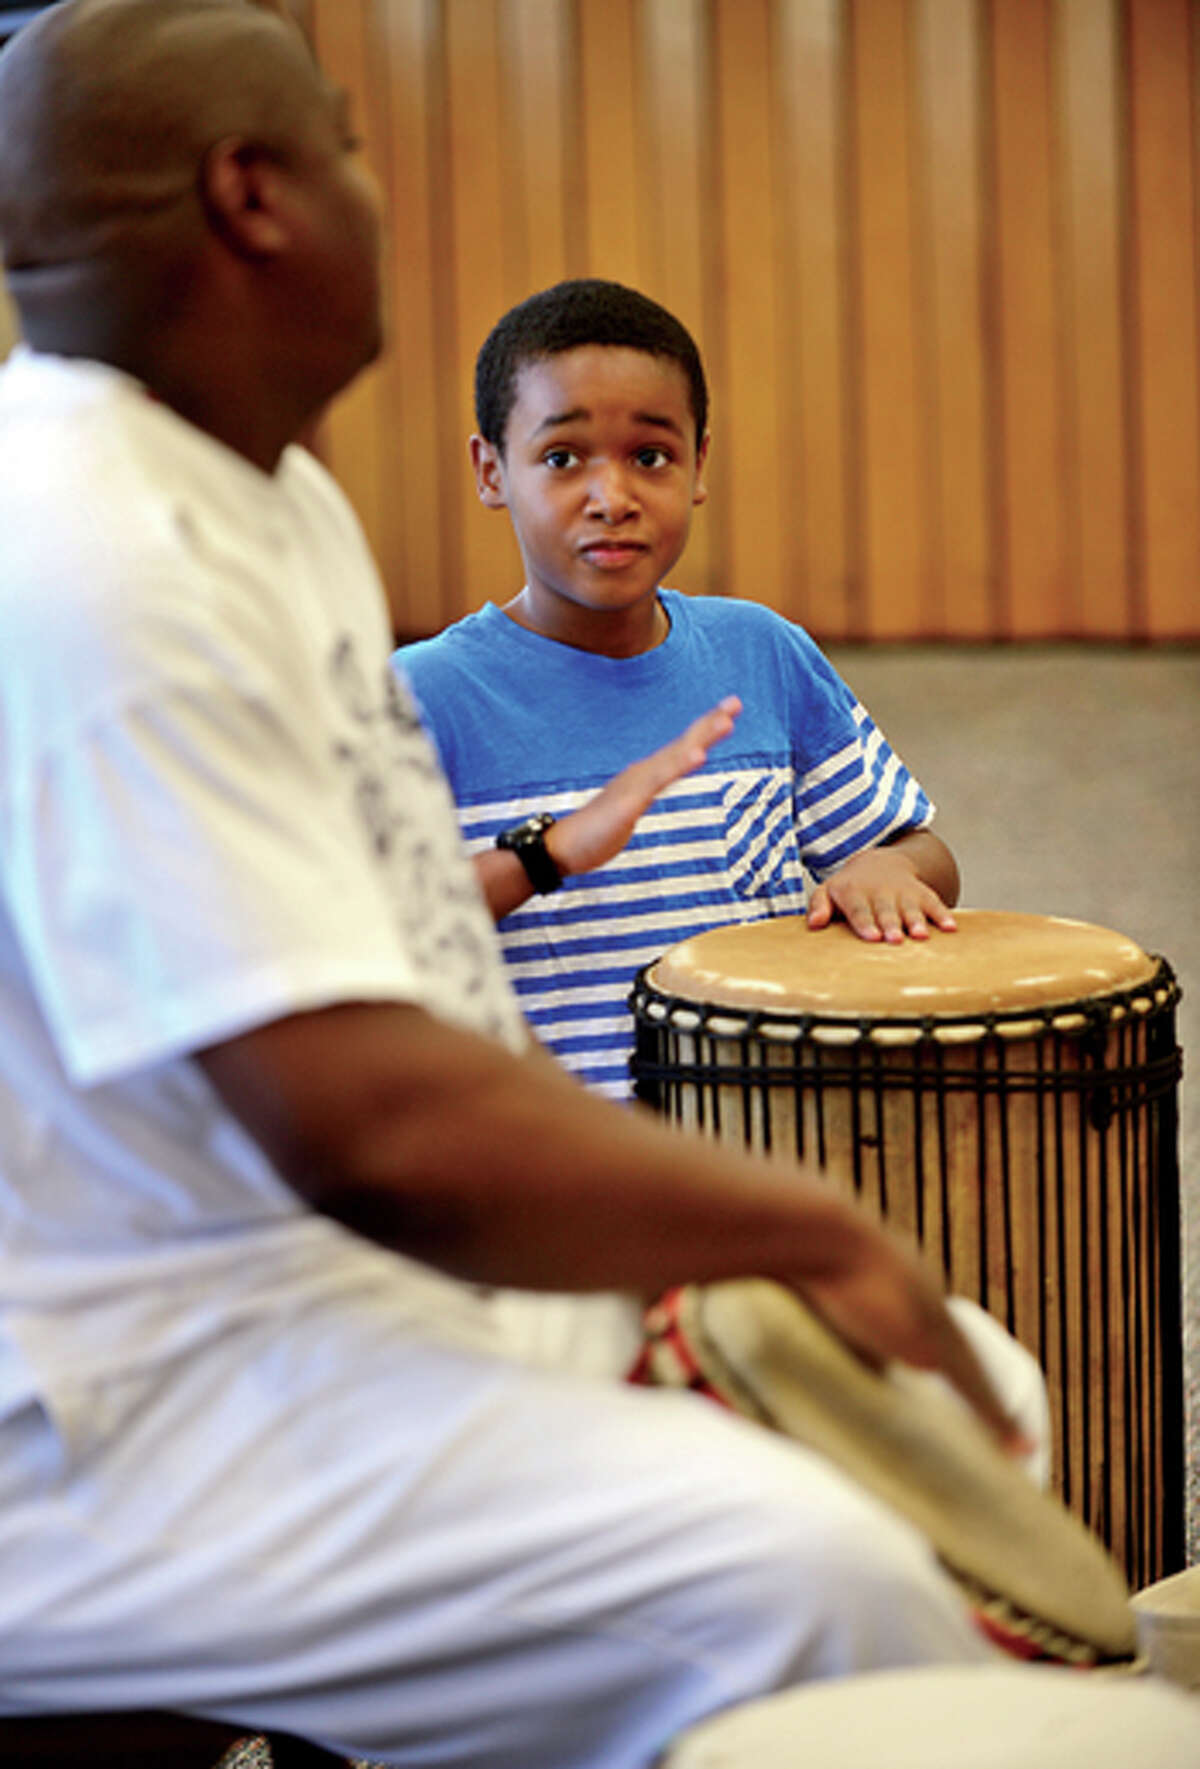 Christian Tapper, 10, drums along with Henry Jones of the Infinite Roots drum troupe at the Norwalk Public Library Friday. Hour photo / Erik Trautmann